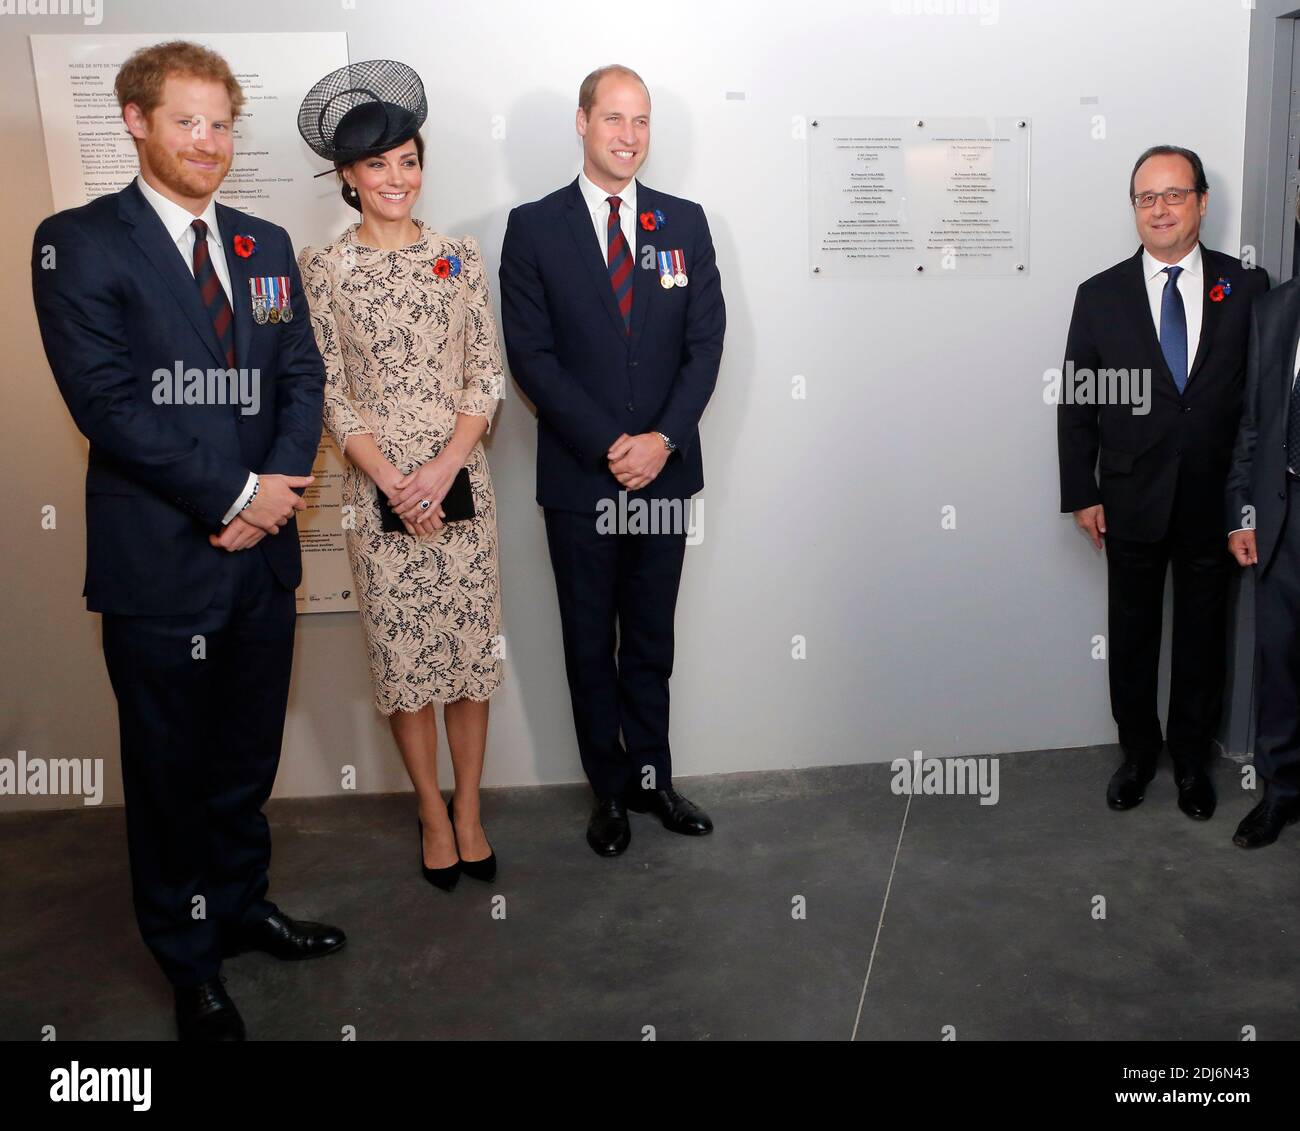 France's President Francois Hollande, right, poses for photographers with Prince William, the Duke of Cambridge, his wife Kate, the Duchess of Cambridge, and Prince Harry, left, inside the World War I Thiepval monument prior to the Somme centenary commemorations in Thiepval, northern France, Friday, July 1st, 2016. One week after Britain's vote to leave the European Union, Prime Minister David Cameron and royal family members will stand side-by-side with France's President to celebrate their historic alliance at the centenary of the deadliest battle of World War I. Photo by Francois Mori/Pool/ Stock Photo